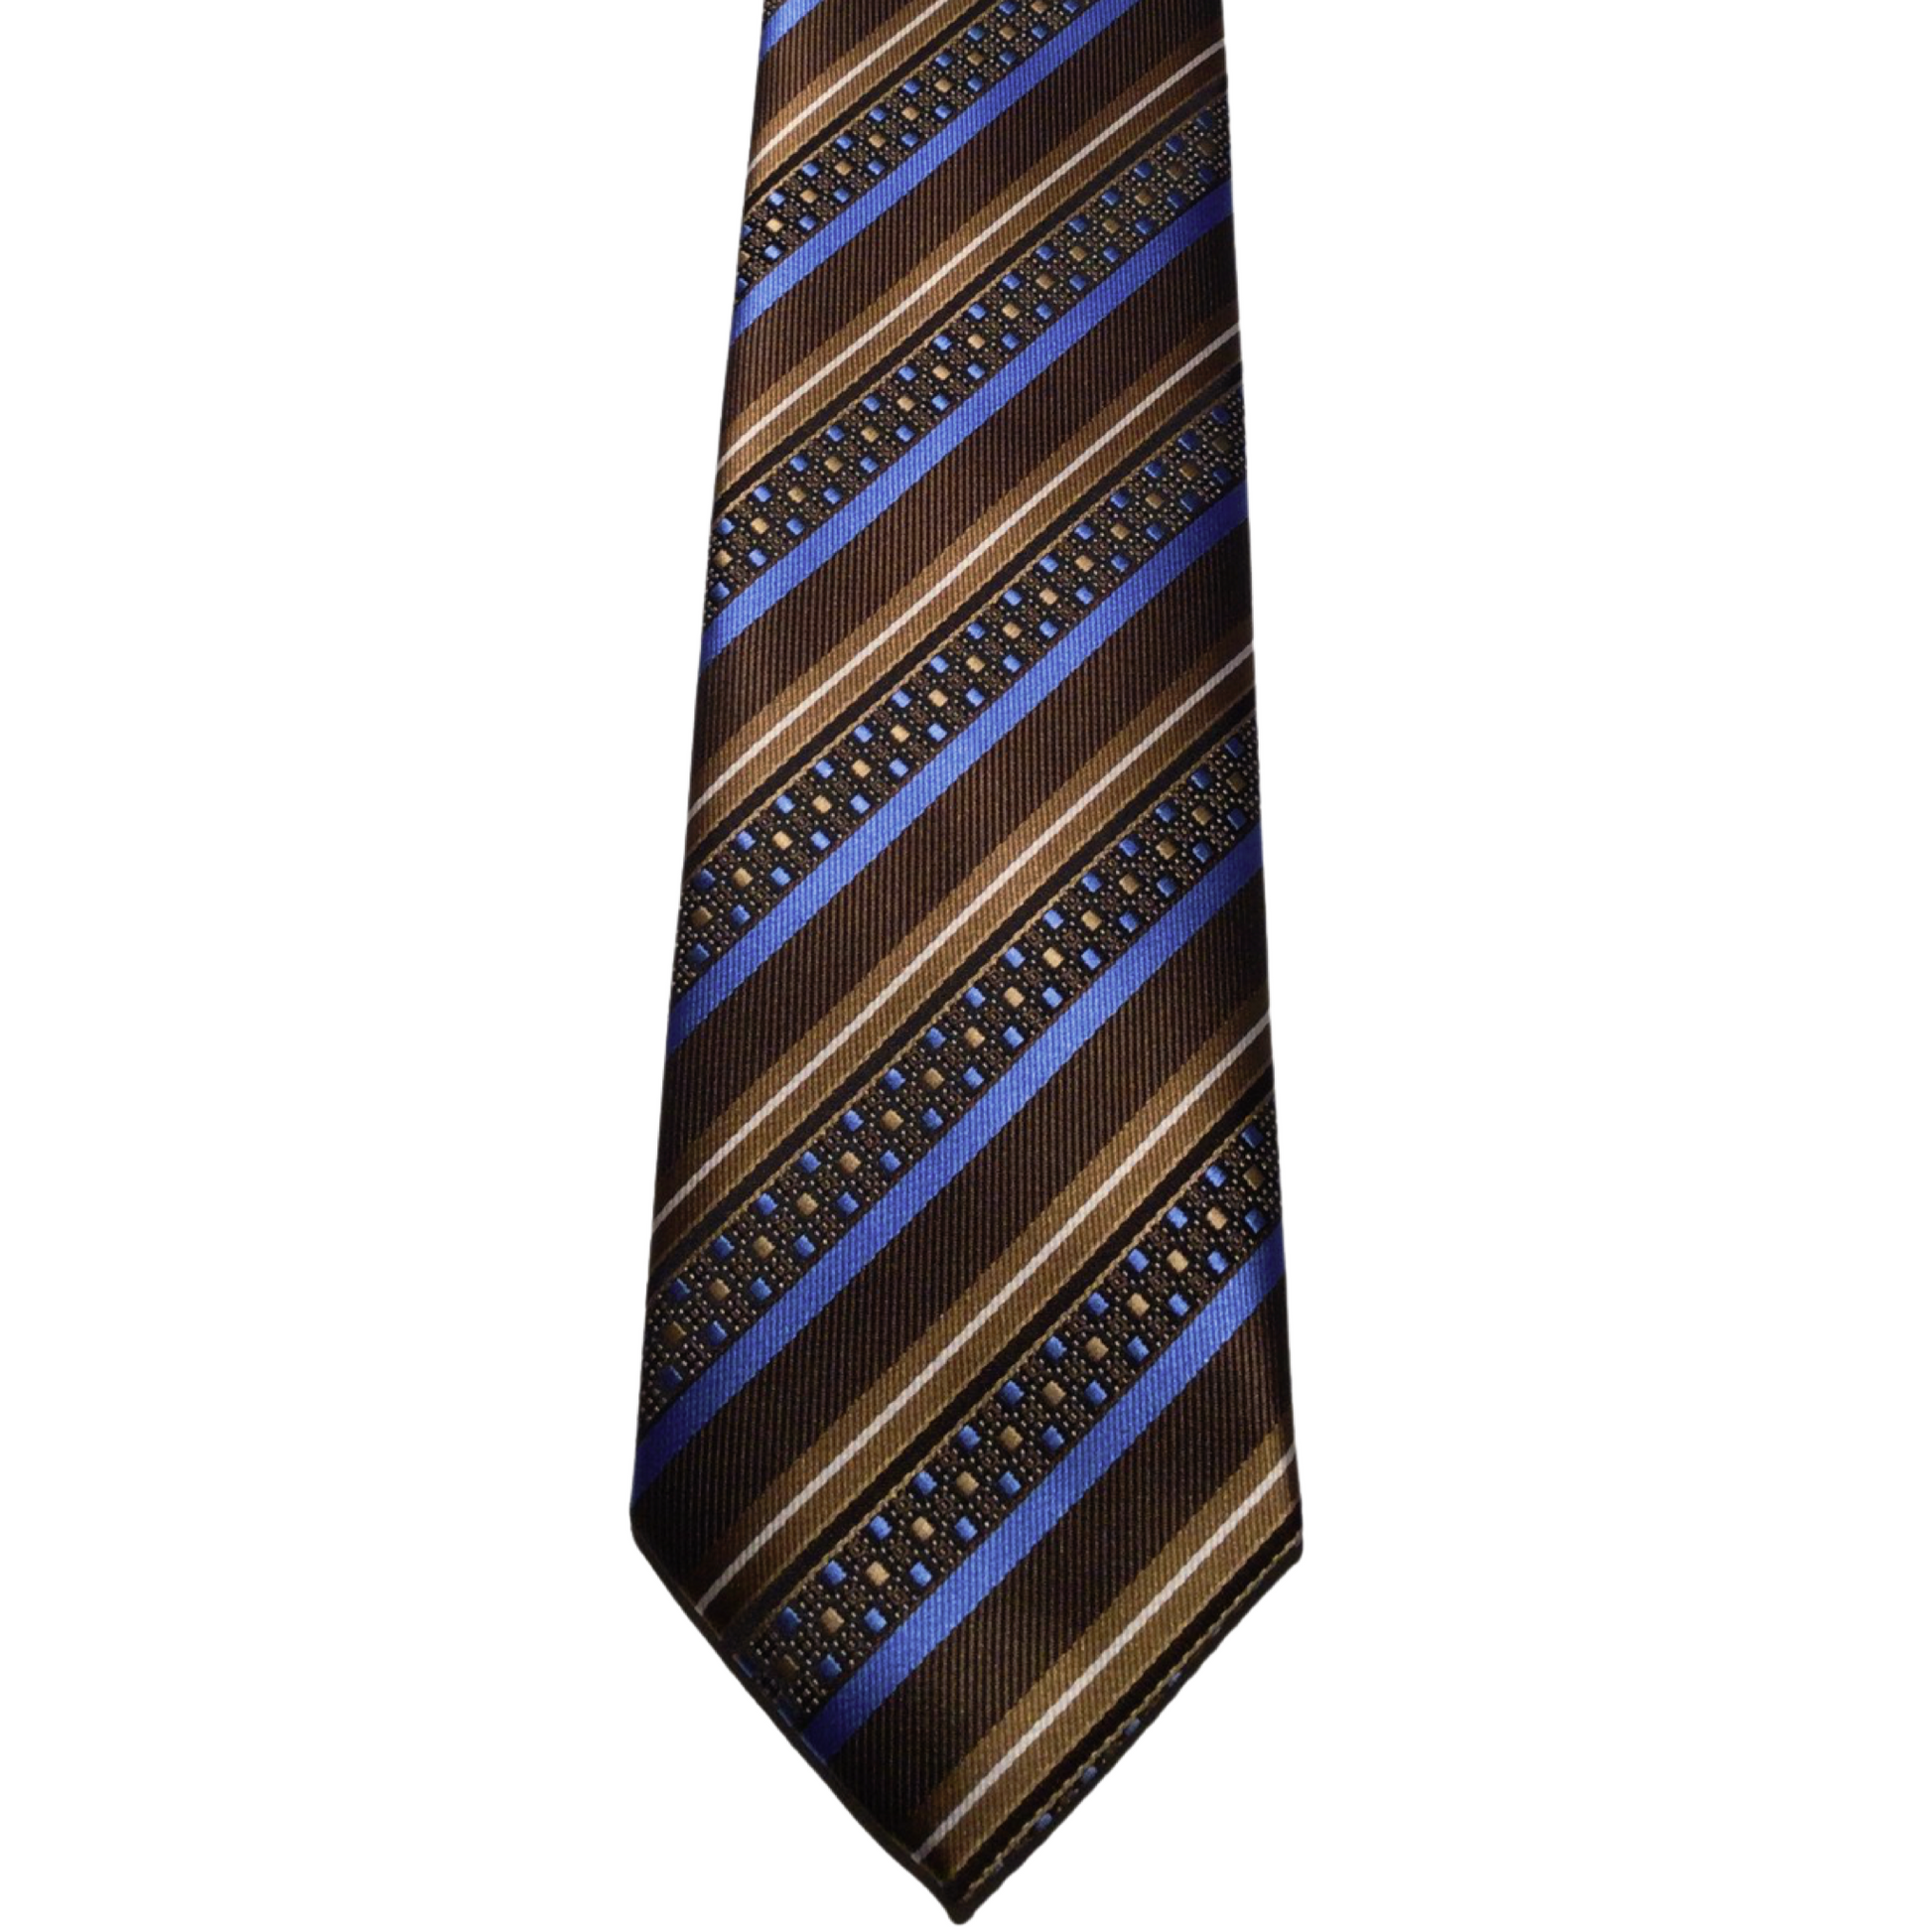 This Gian Marco Venturi microfibre brown tie has a light blue and beige stripe pattern, making it a nice pairing with a crisp white or light blue Scoop dress shirt, a navy blue suit and brown shoes.